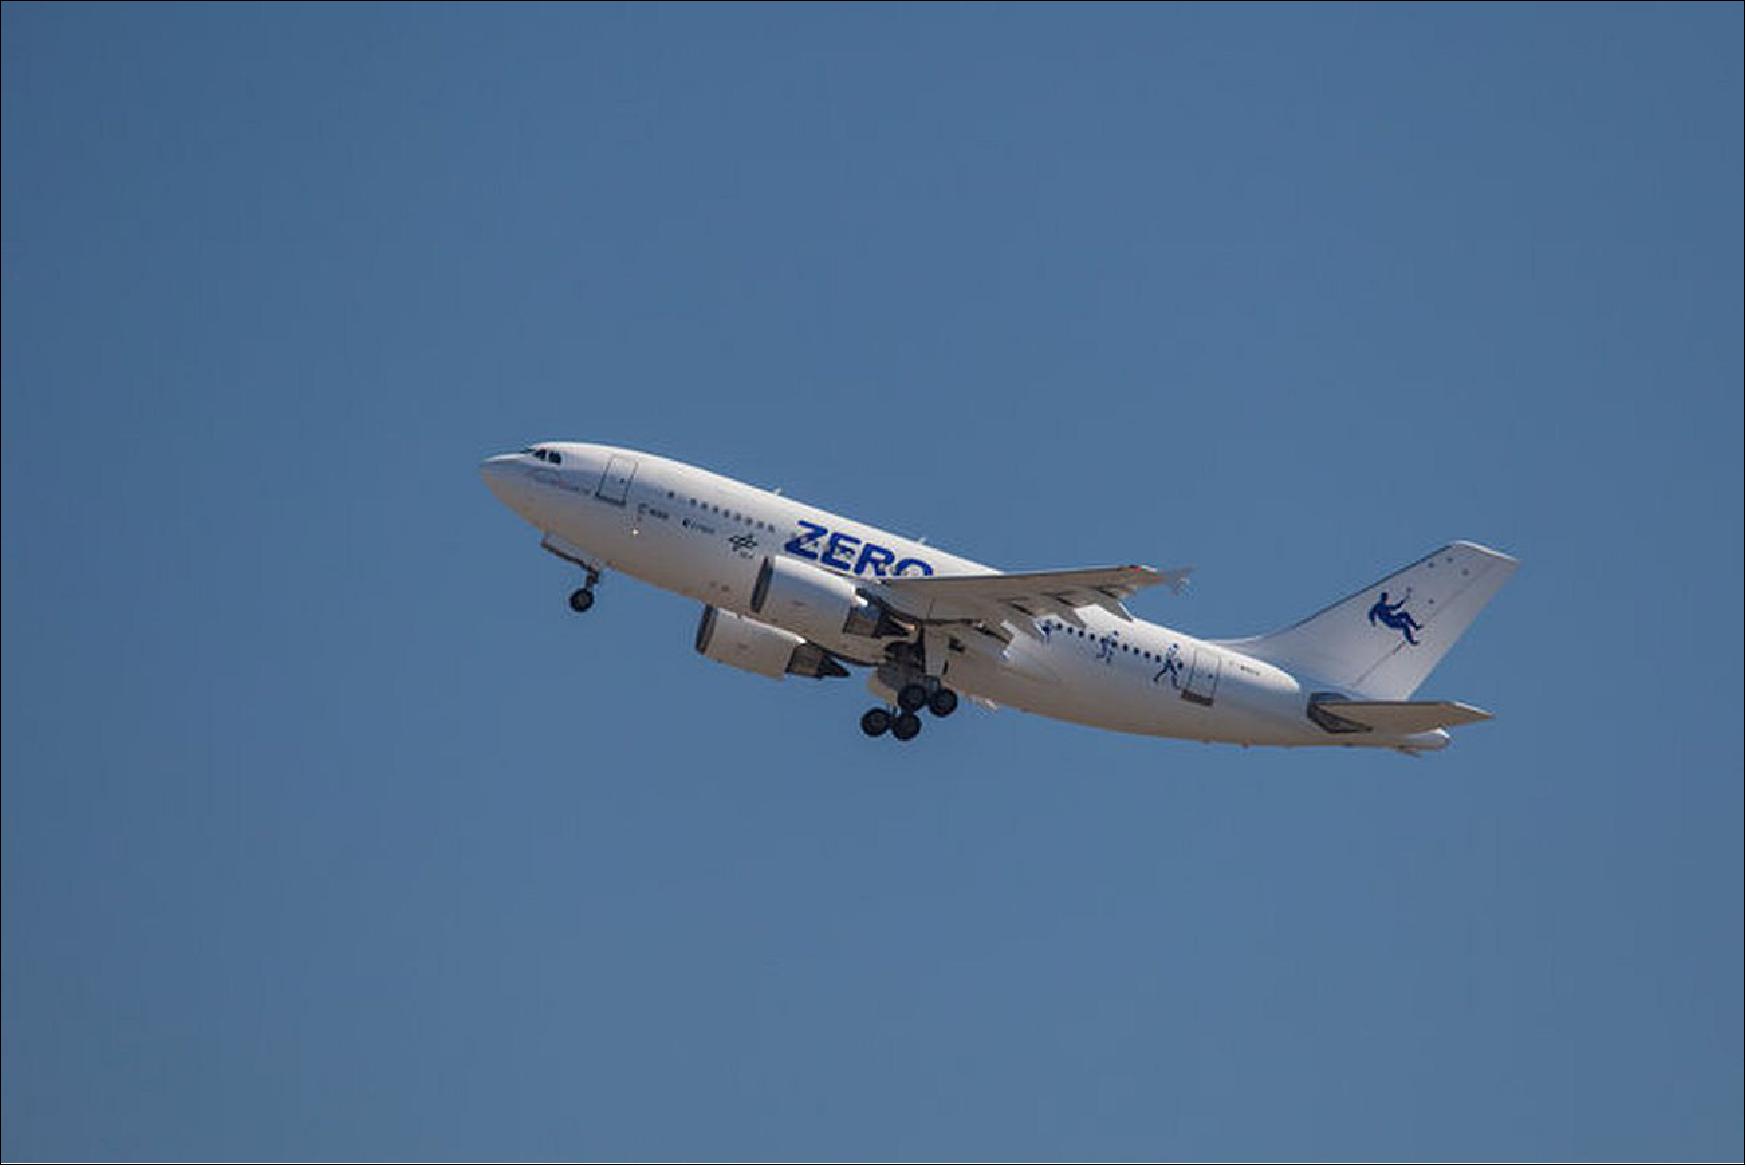 Figure 42: Photo of the refitted Airbus A310 aircraft after take-off for a test-flight for weightless research (image credit: ESA) 36)